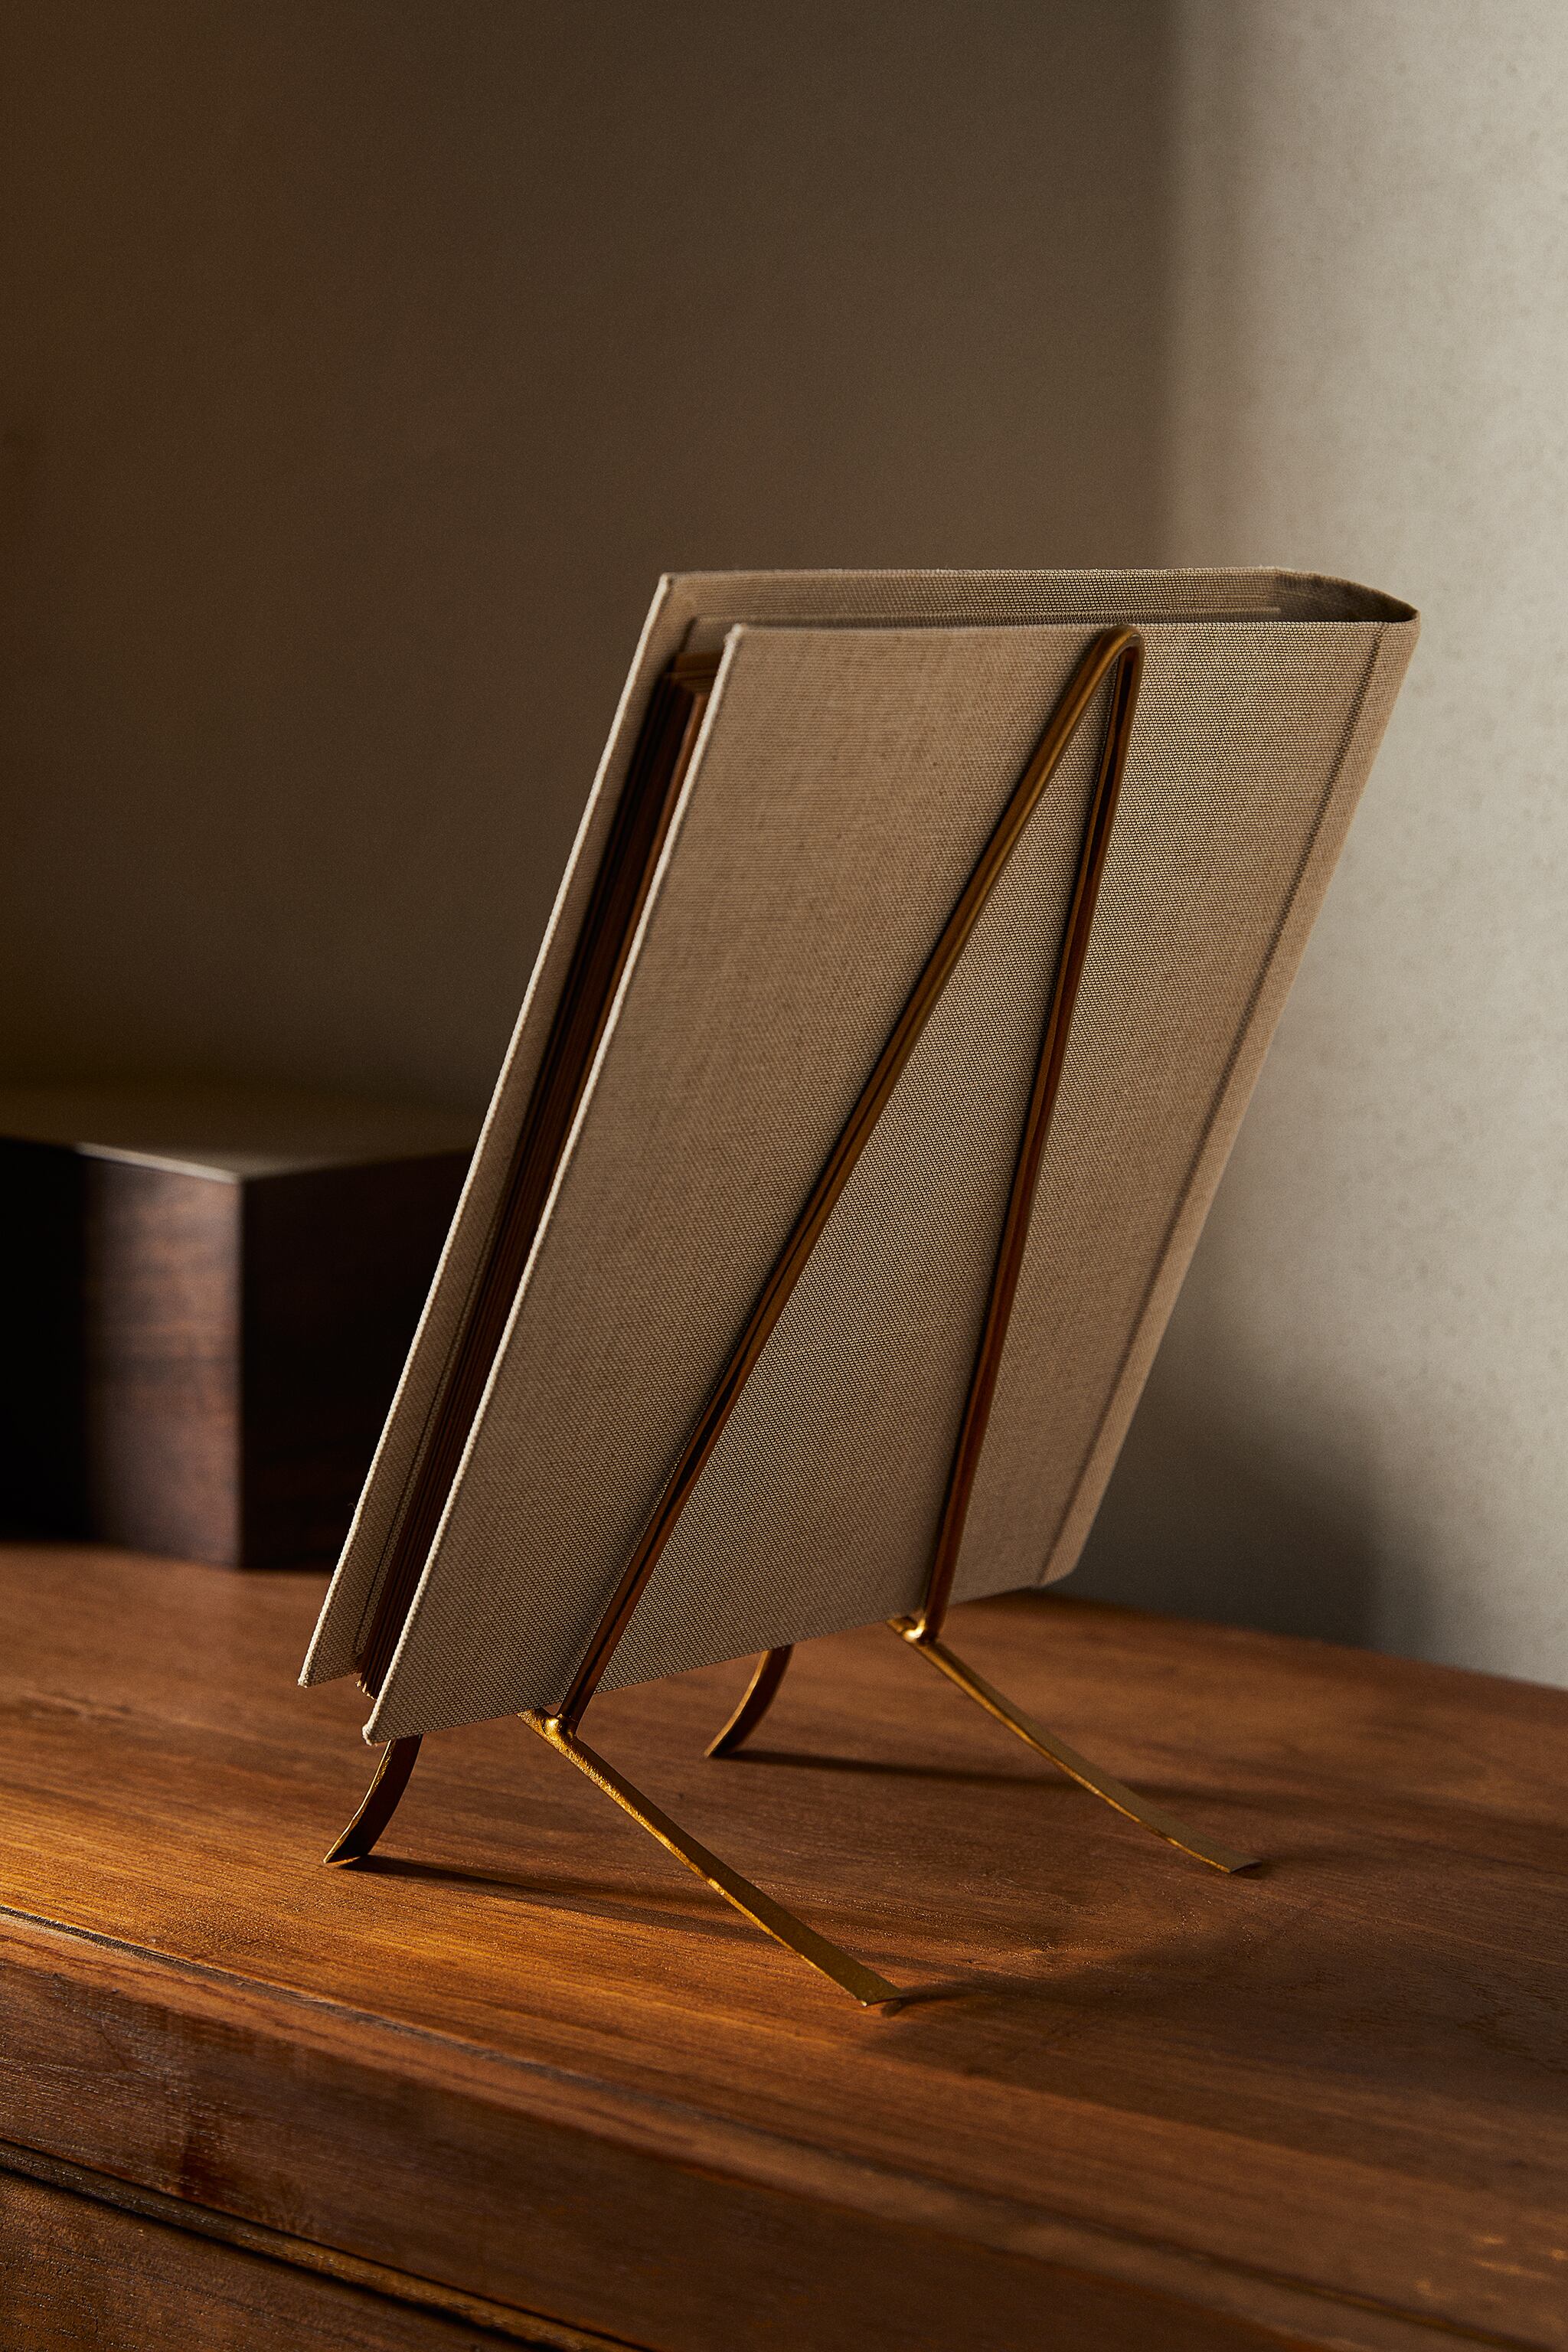 GOLD METAL DISPLAY STAND